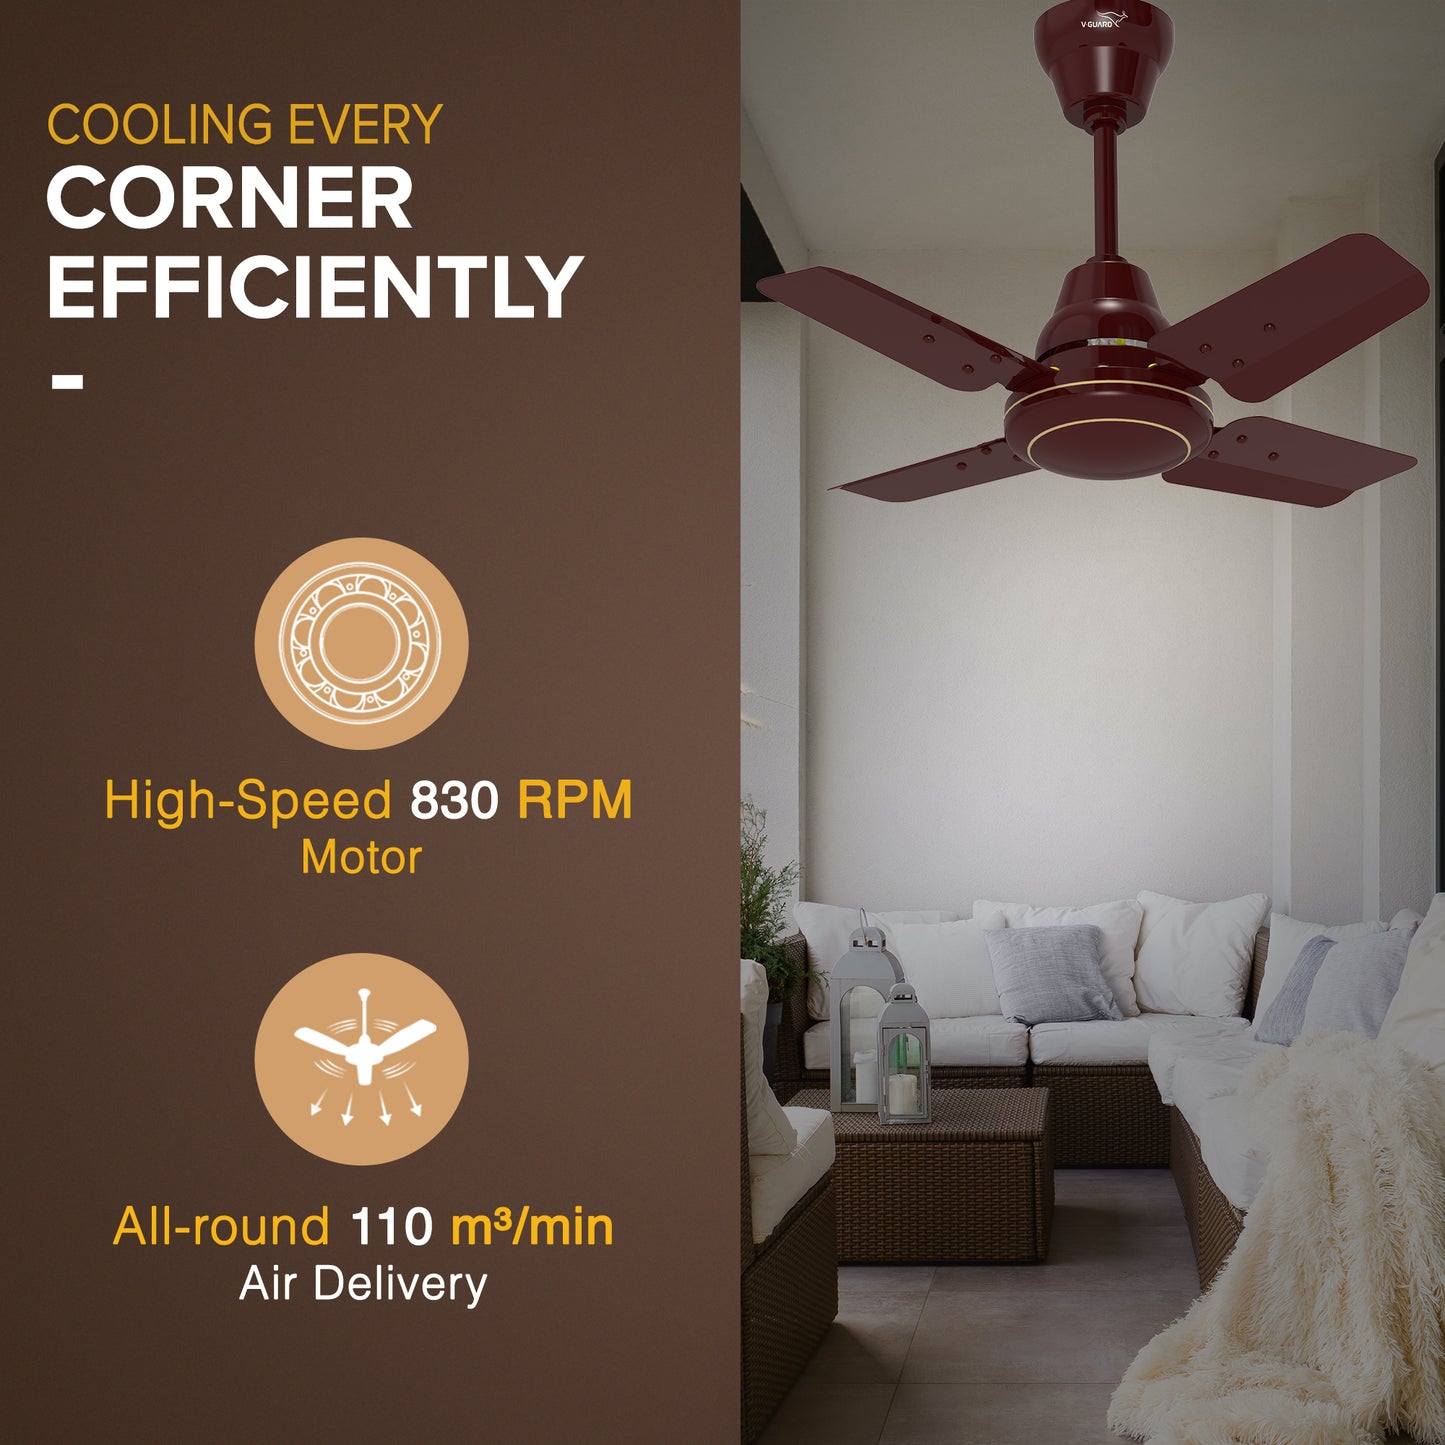 Windle Pro AS High-Speed Ceiling Fan for Home 60 cm, Cherry Brown